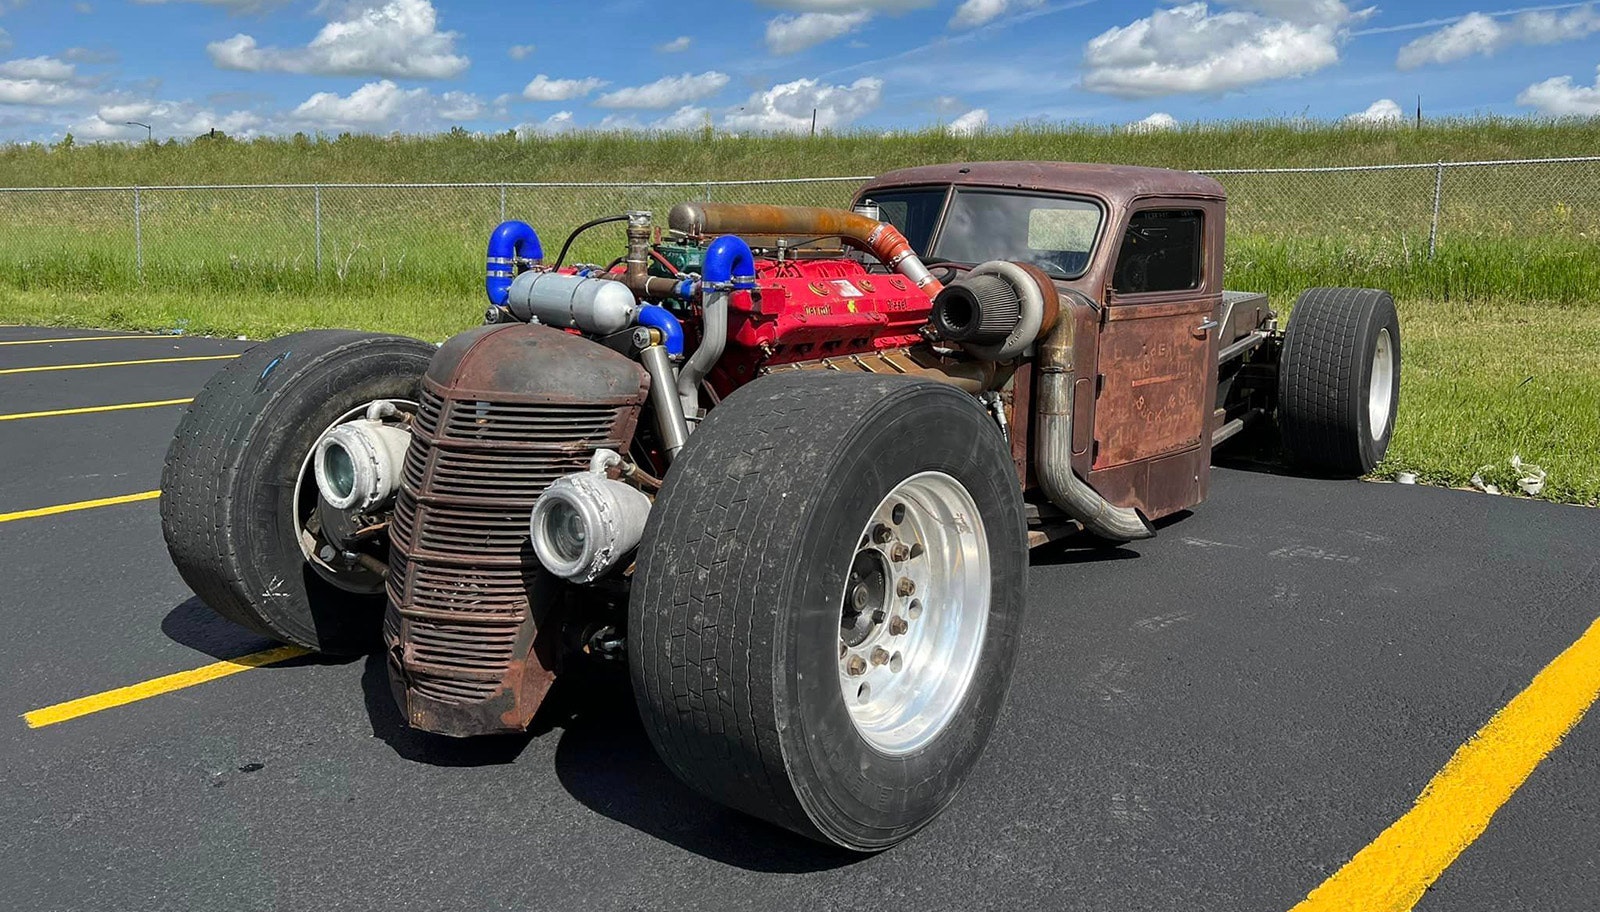 Maximus is a rat rod built by Tom Simons of Gillette using a diesel engine previously used for hydraulic fracking.